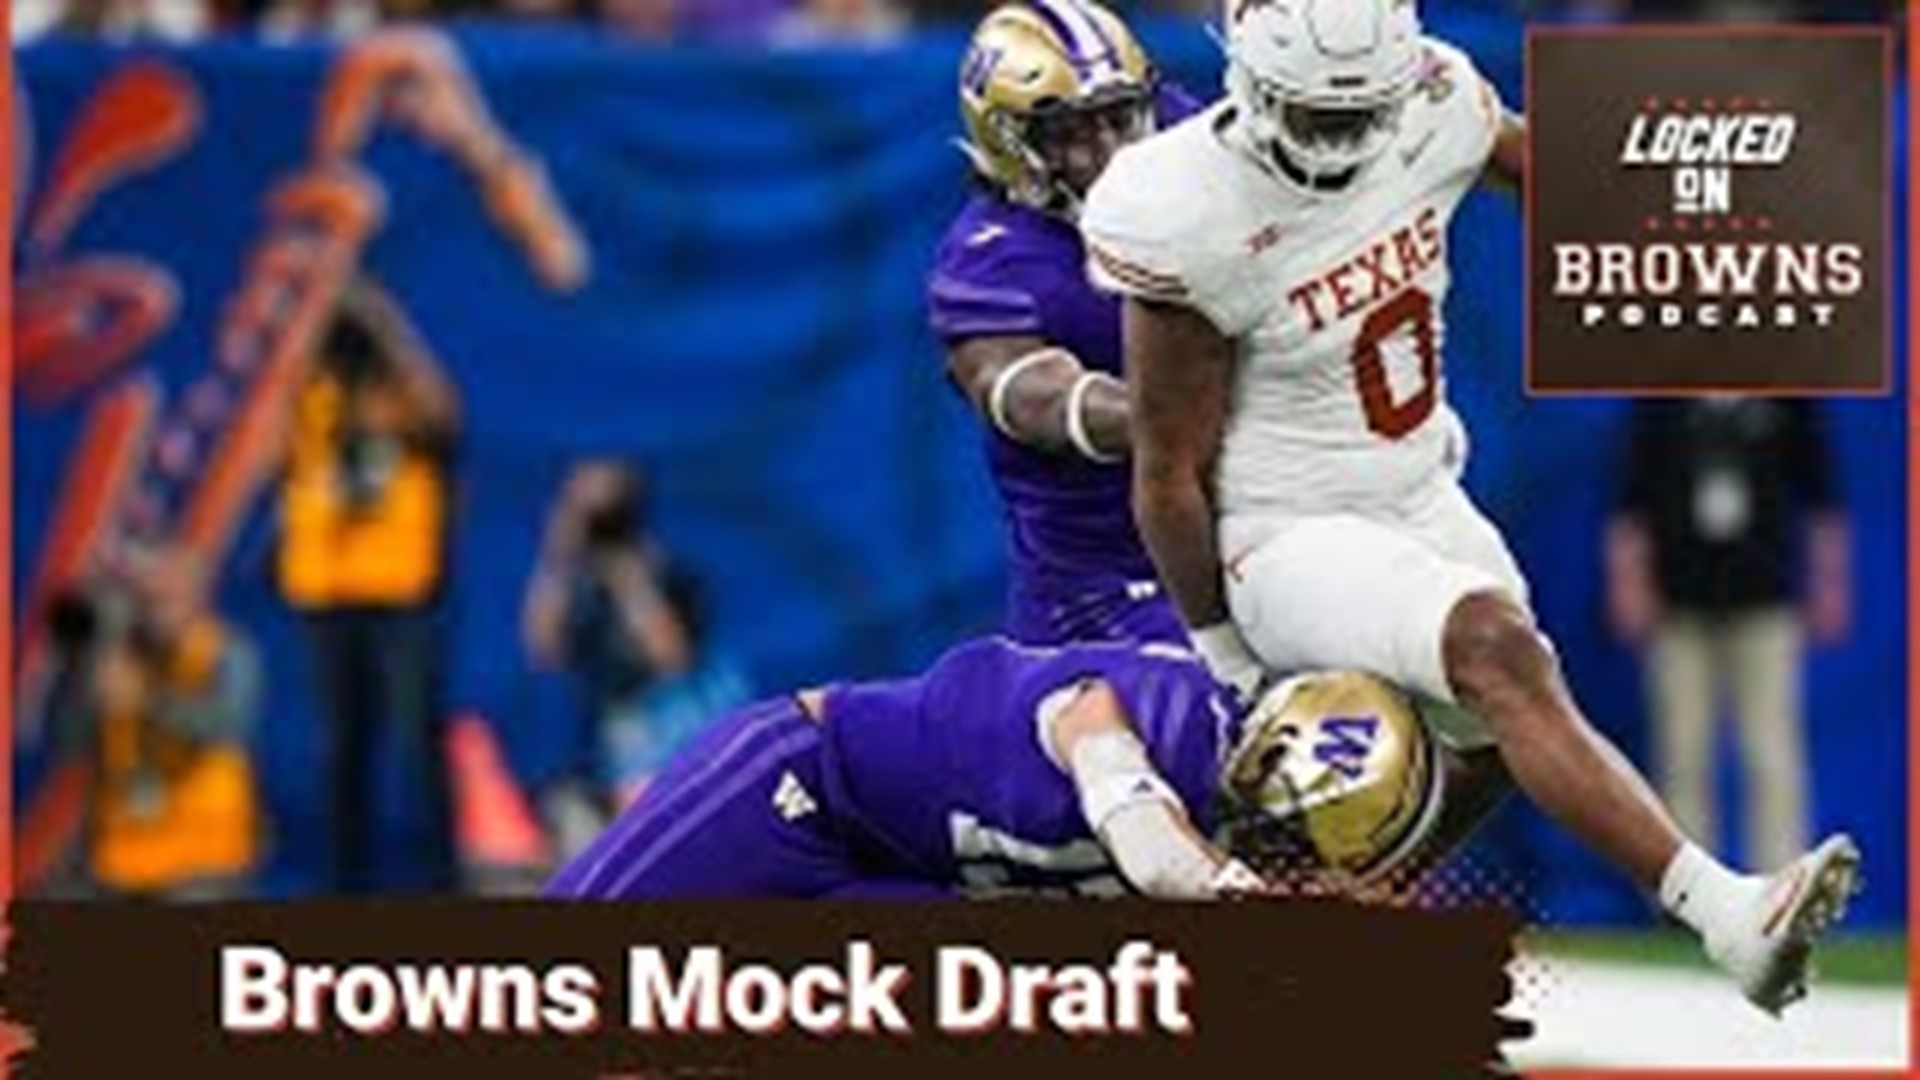 The OBR's Pete Smith joins to talk his final Browns mock draft, the consensus is Cleveland will be focused on offense.